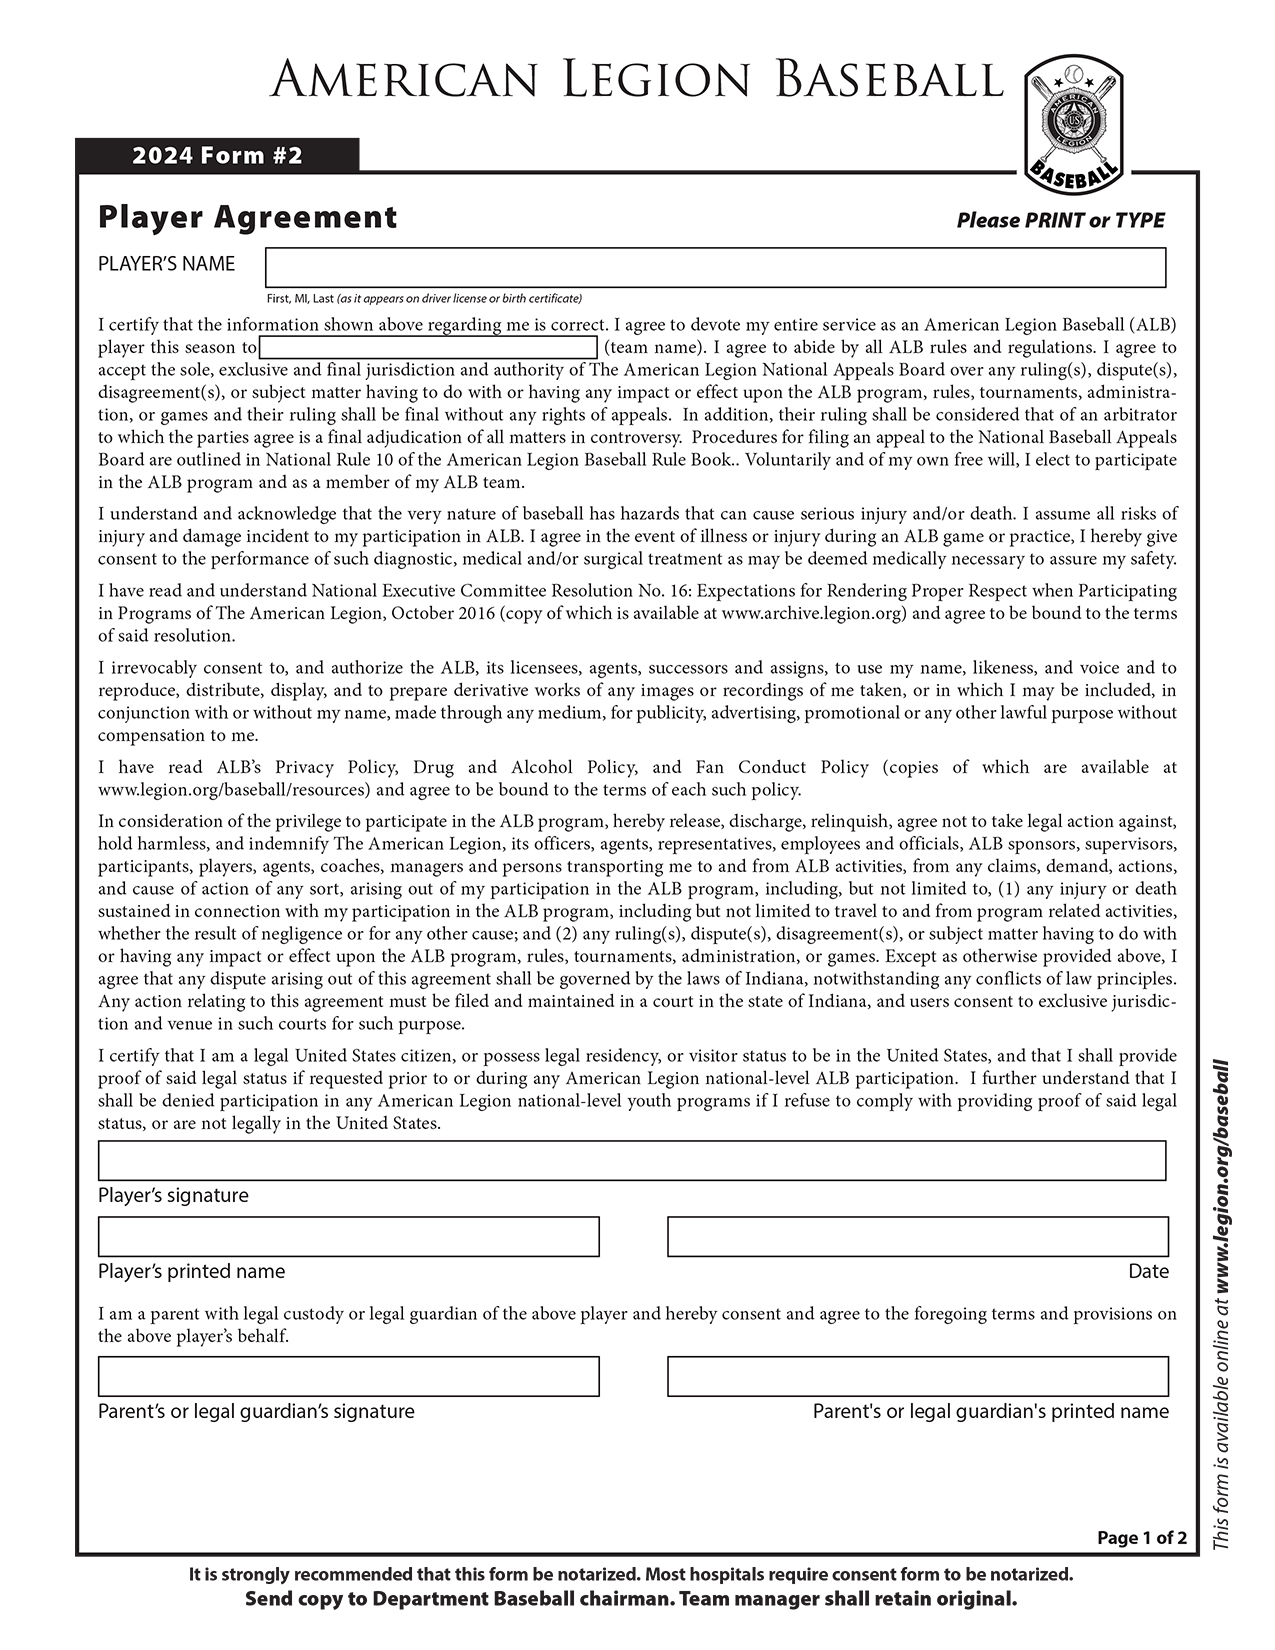 Player Agreement Form